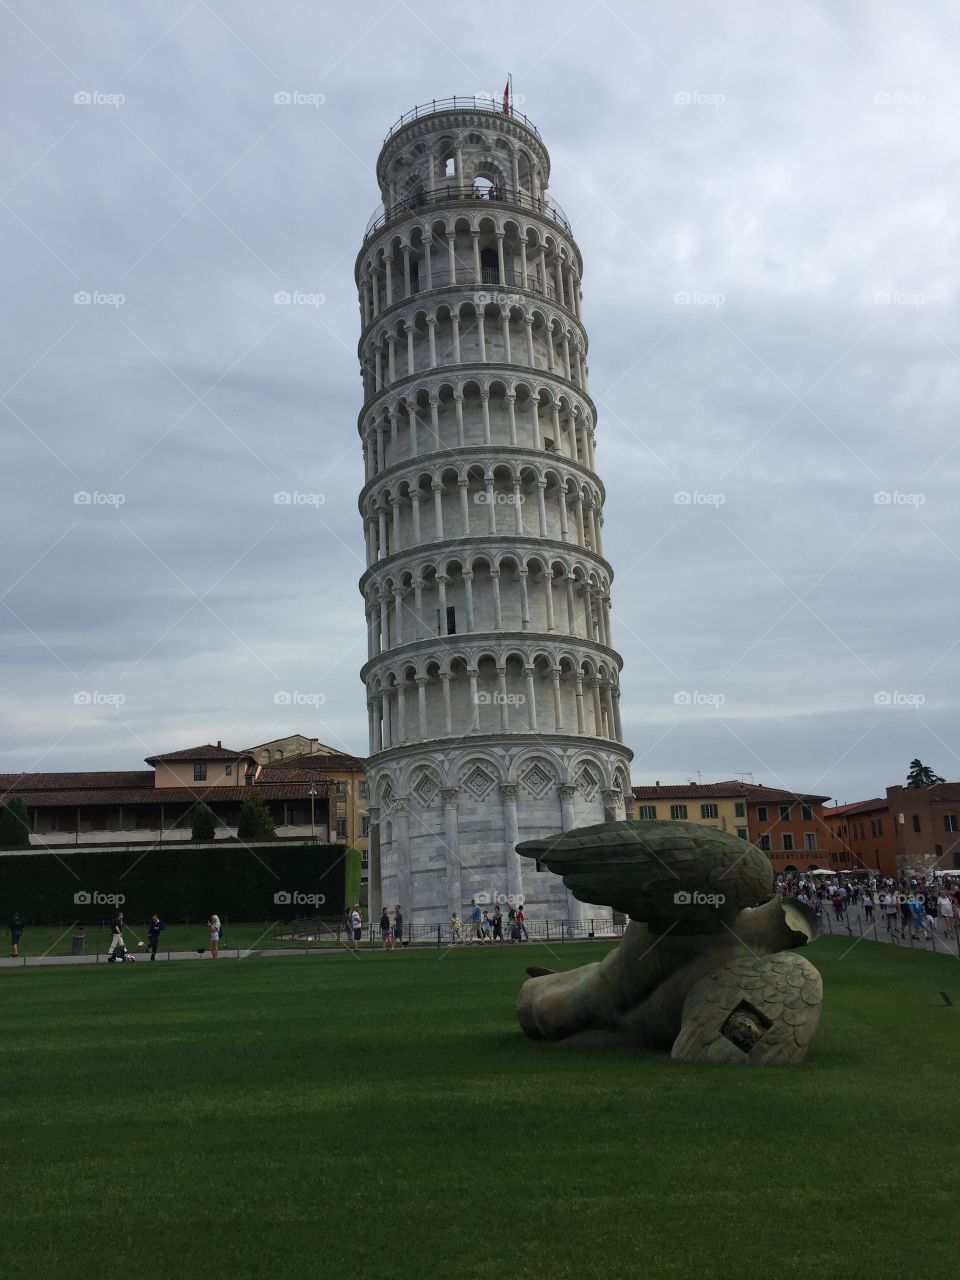 The fallen angel and Leaning tower, Pisa, Itally